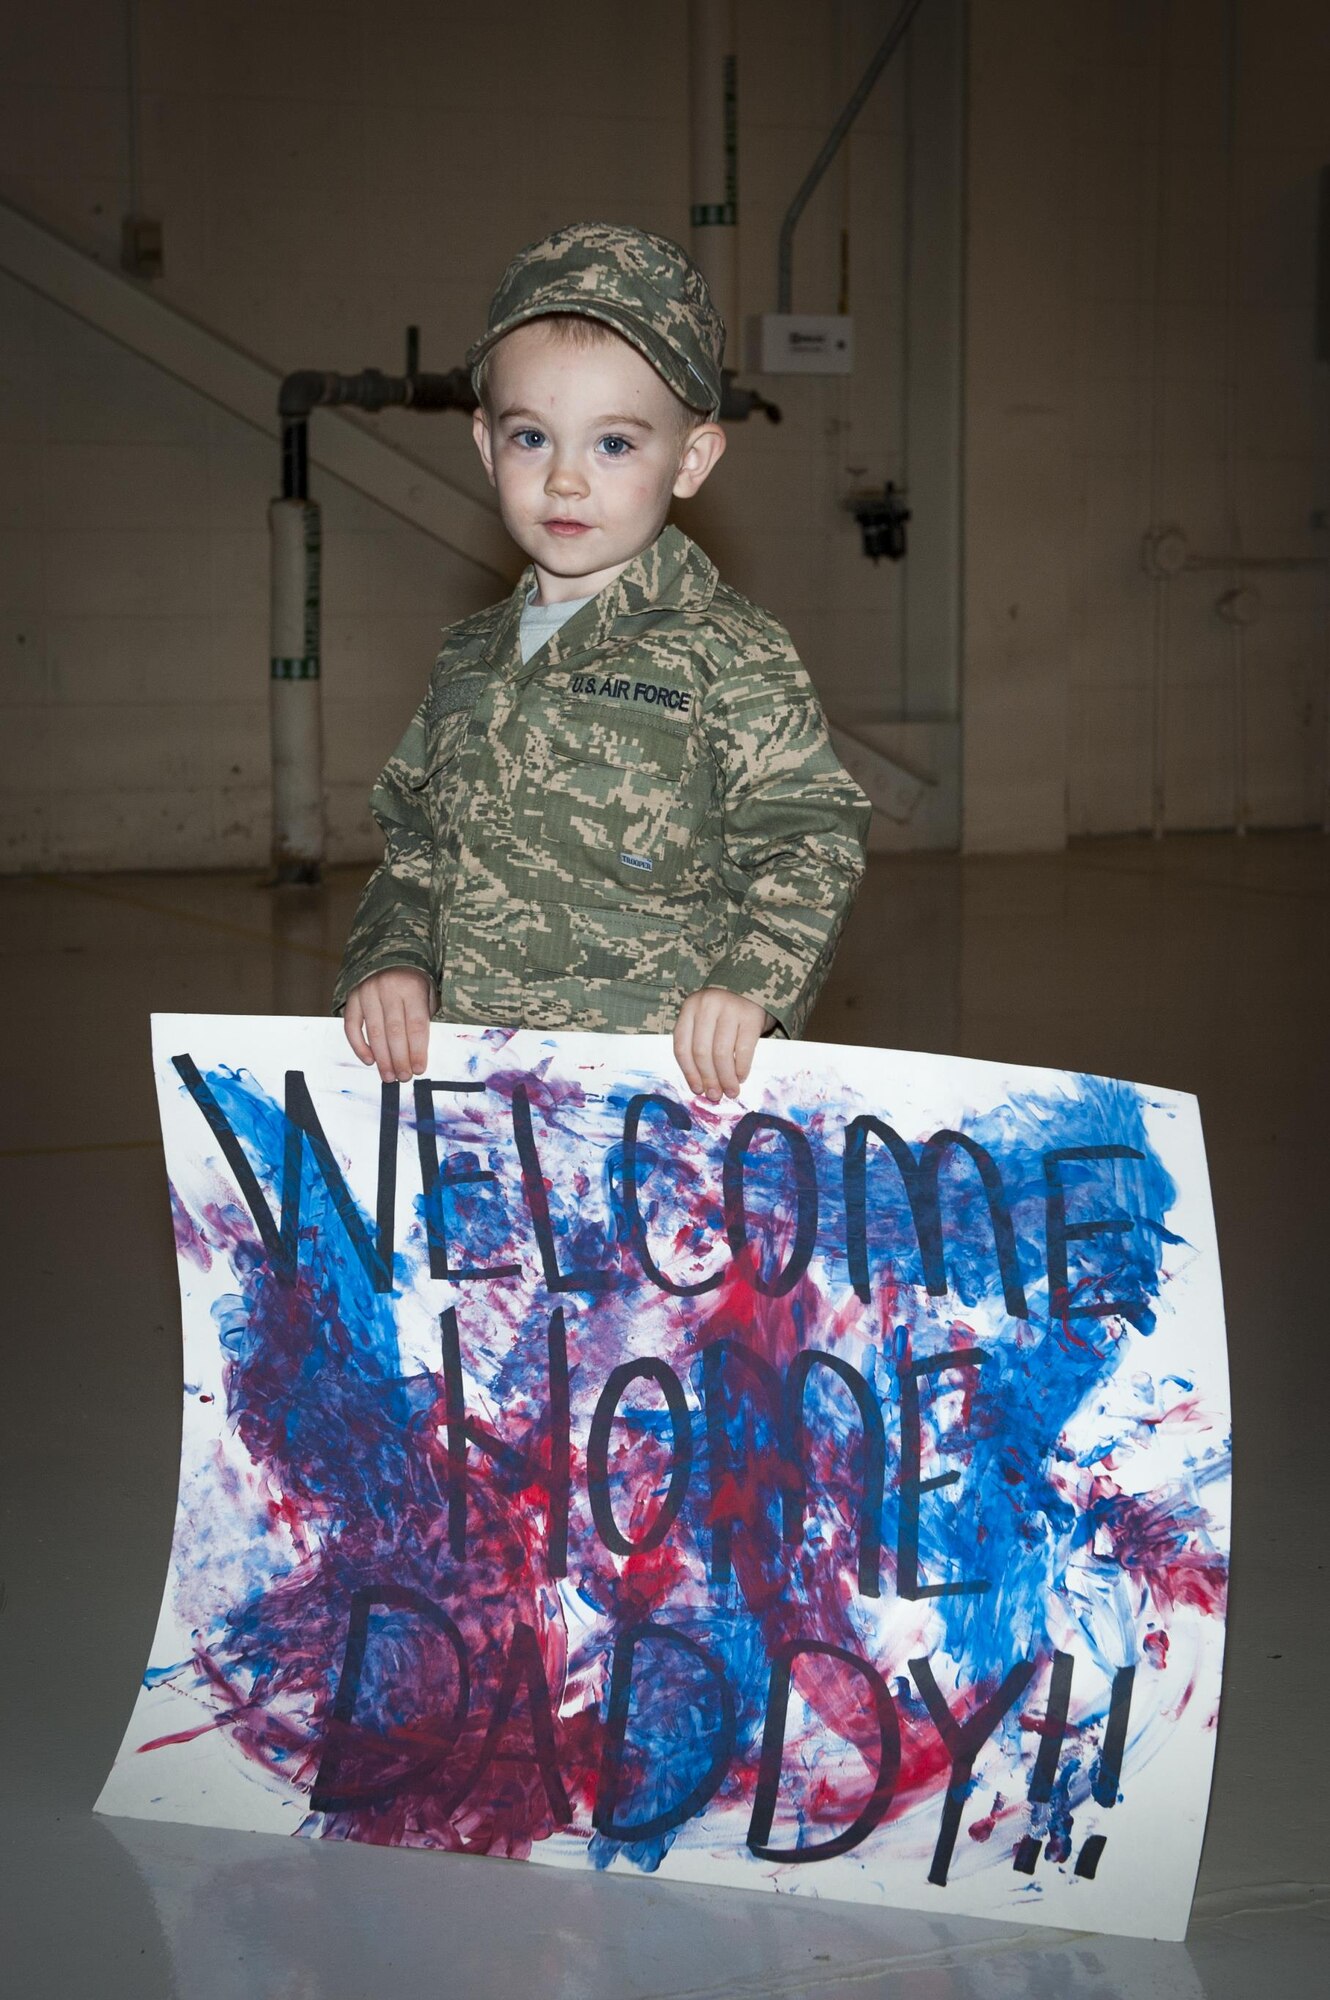 Wade Thompson, son of U.S. Air Force Staff Sgt. Joseph Thompson, 74th Expeditionary Fighter Squadron lead crew member, stands with a welcome home sign during a redeployment, March 30, 2016, at Moody Air Force Base, Ga. The 74th EFS returned from a theater security package deployment throughout Eastern Europe. (U.S. Air Force photo by Airman 1st Class Lauren M. Hunter/Released)